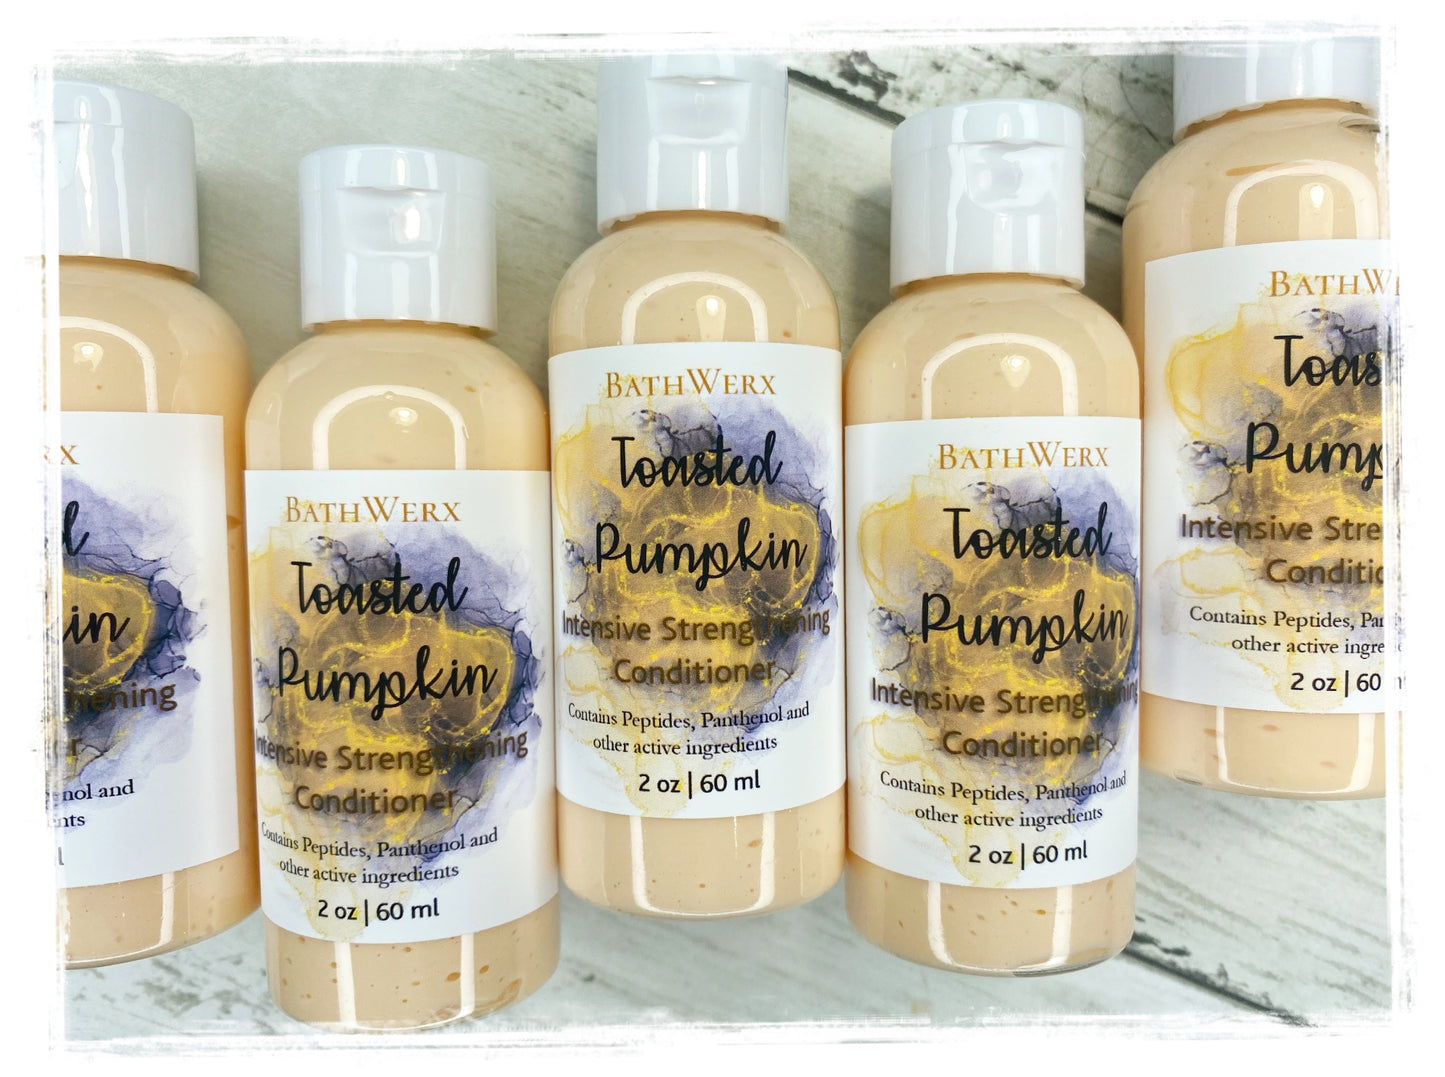 Fall Exclusive: Intensive Strengthening Conditioner Toasted Pumpkin